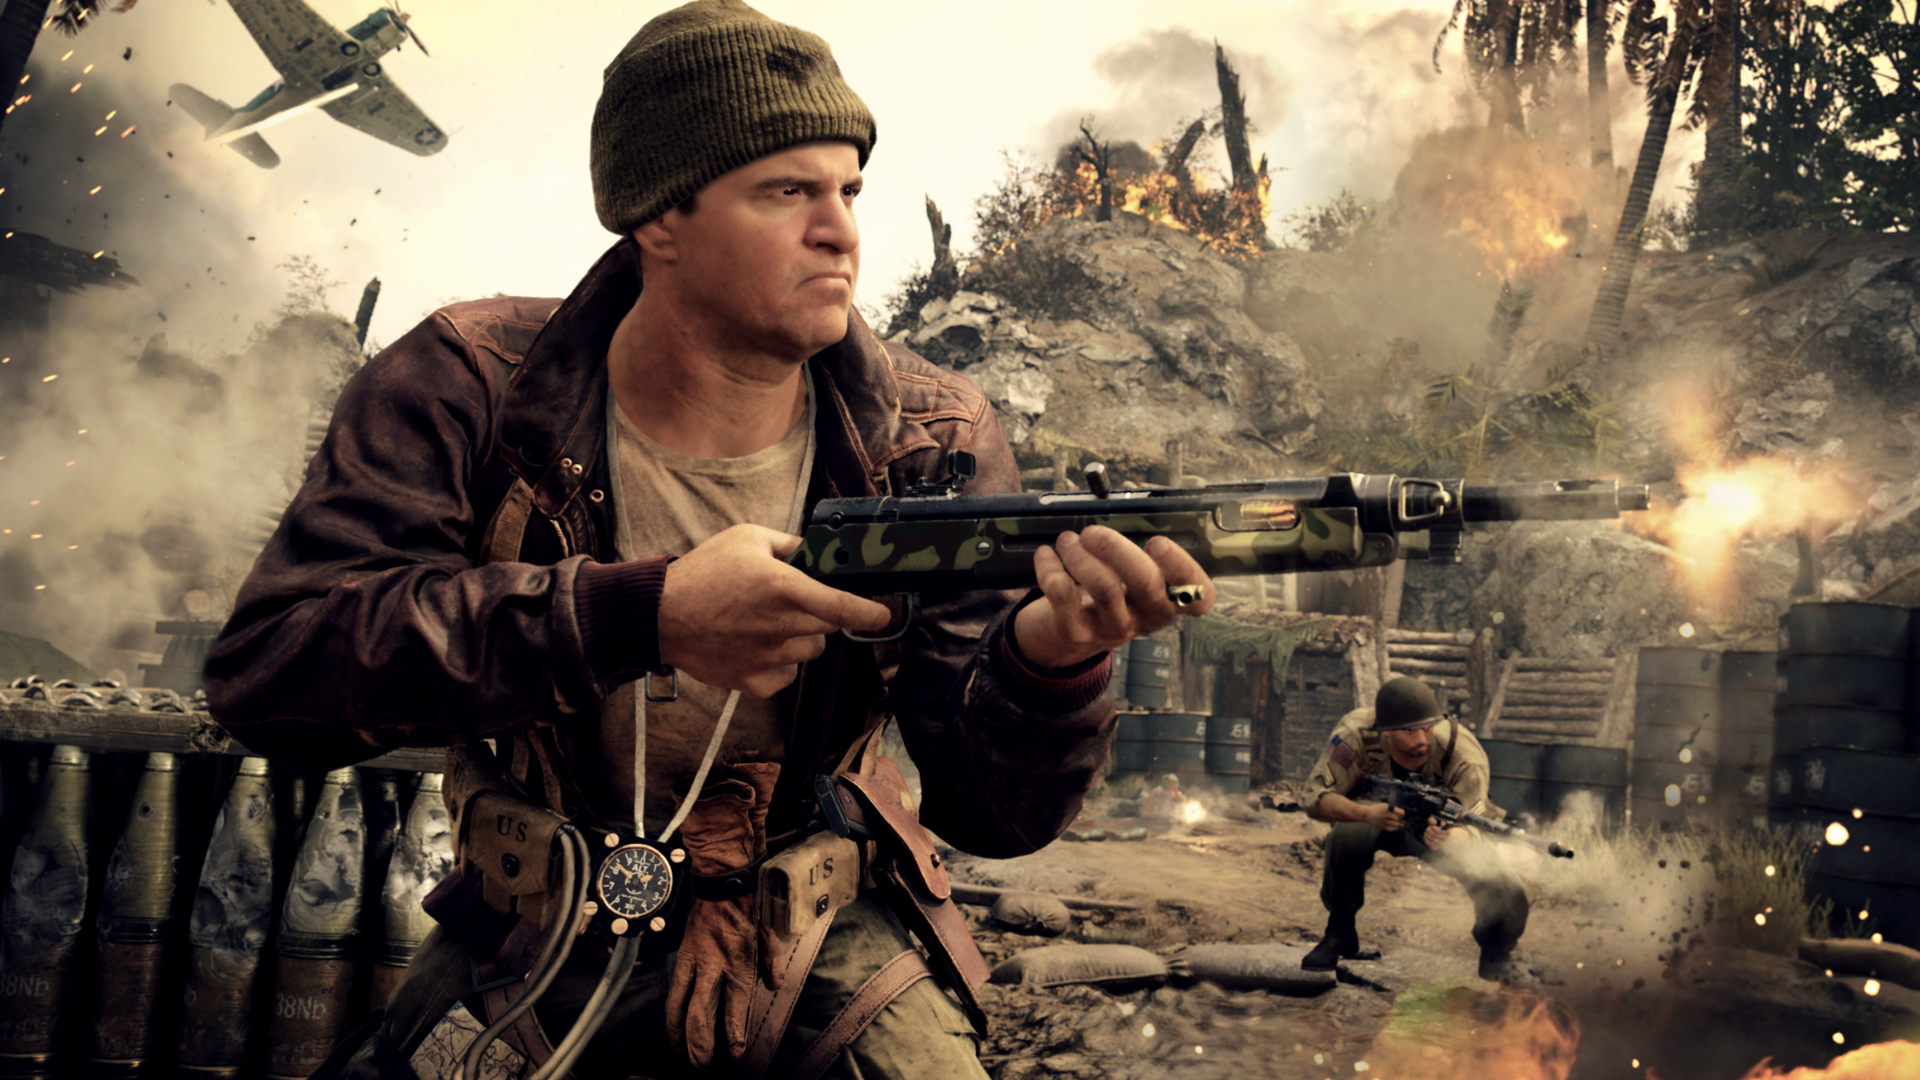 Video game screenshot of a World War 2 soldier holding a rifle while a plane flies overhead